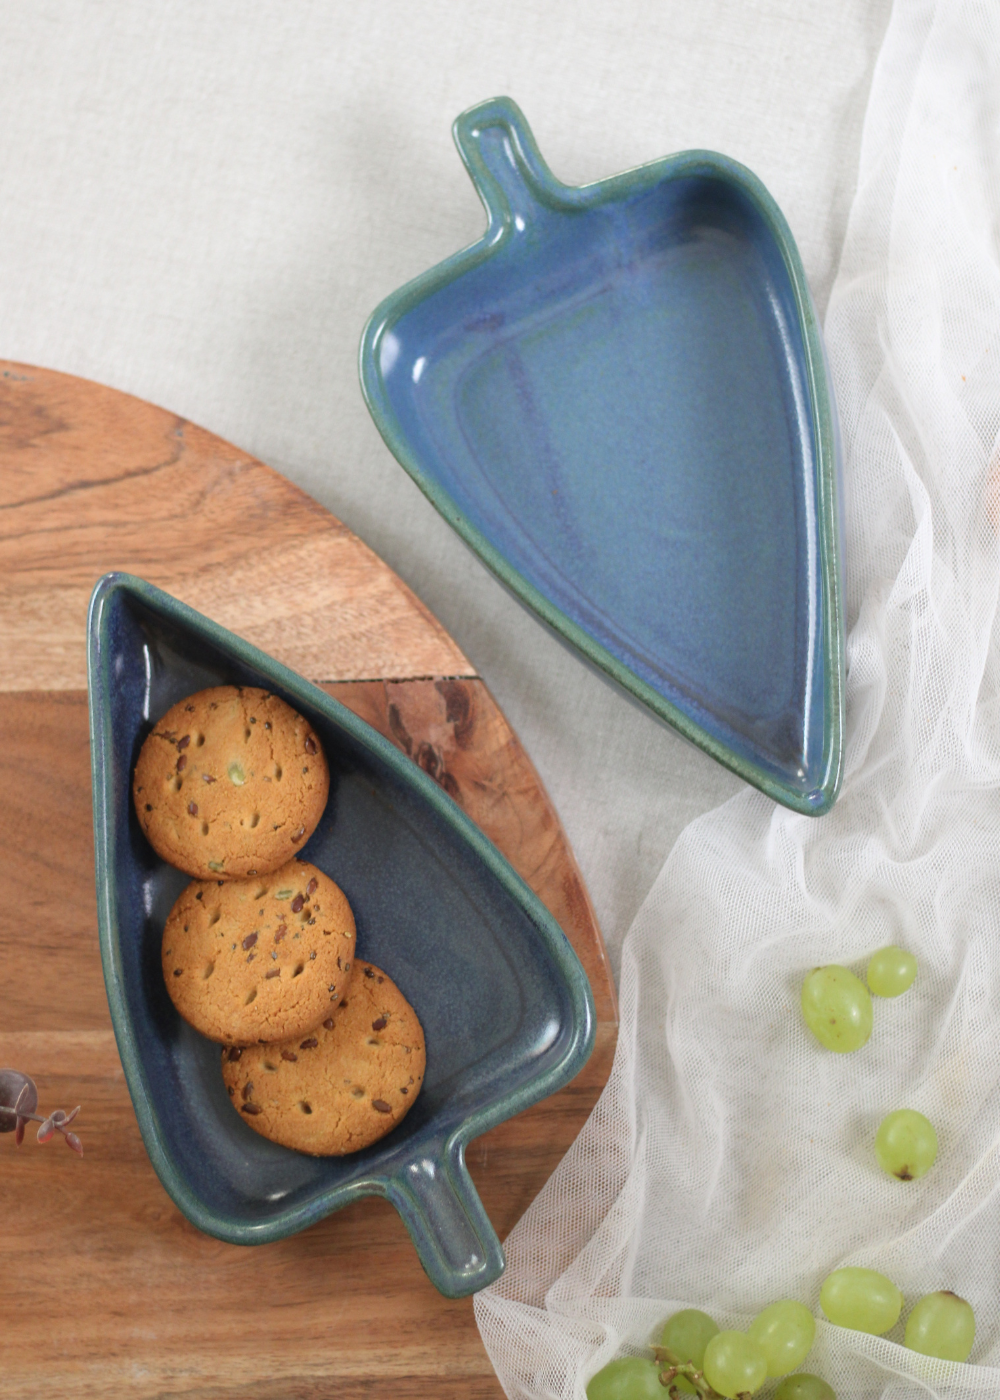 Handmade ceramic blue leaf bowls with biscuits